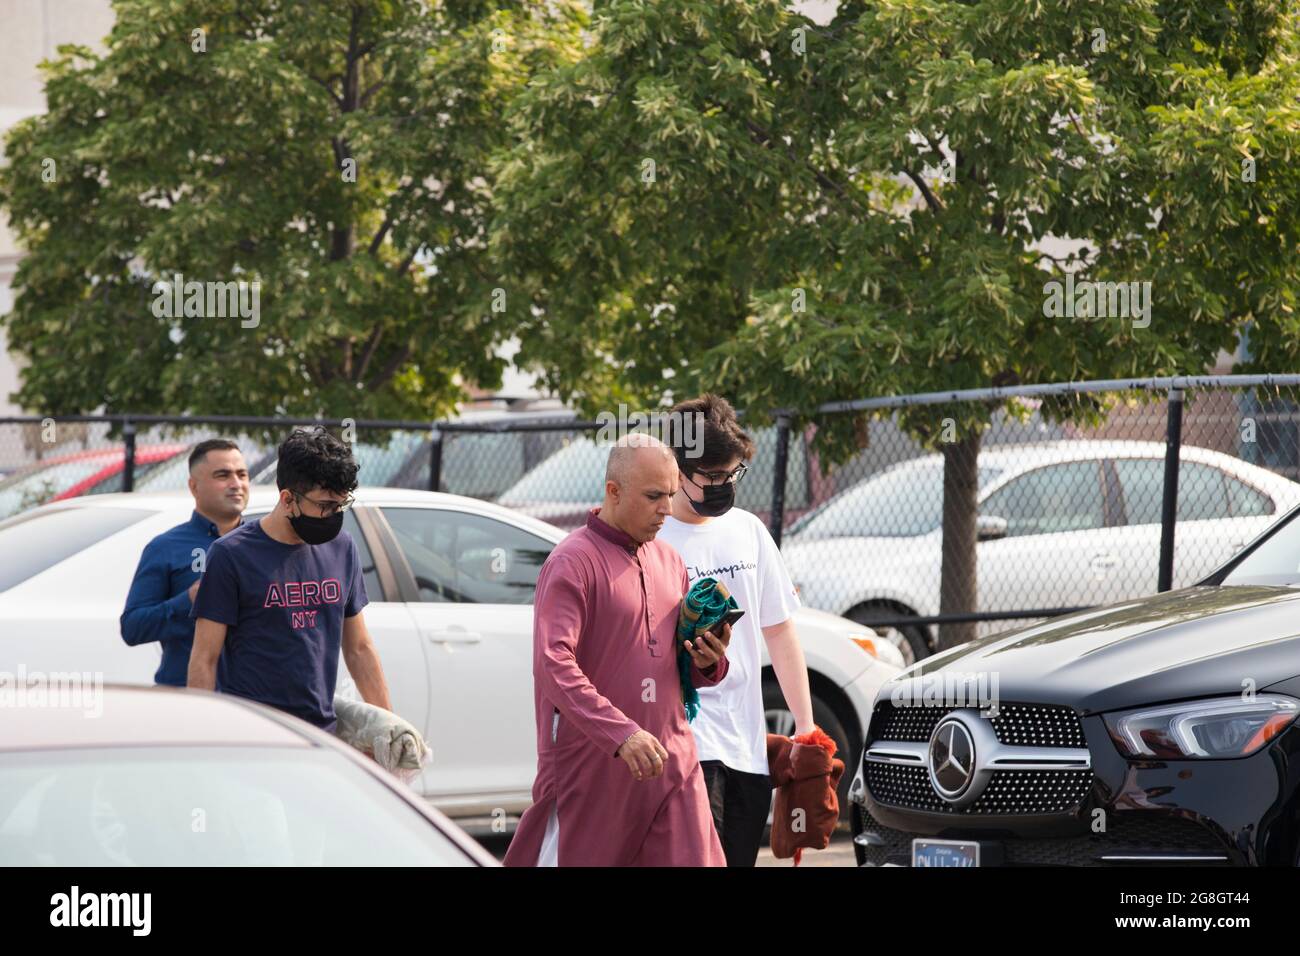 Some Muslim men are walking together through the parking lot with their prayer rugs during Eid festival. Stock Photo